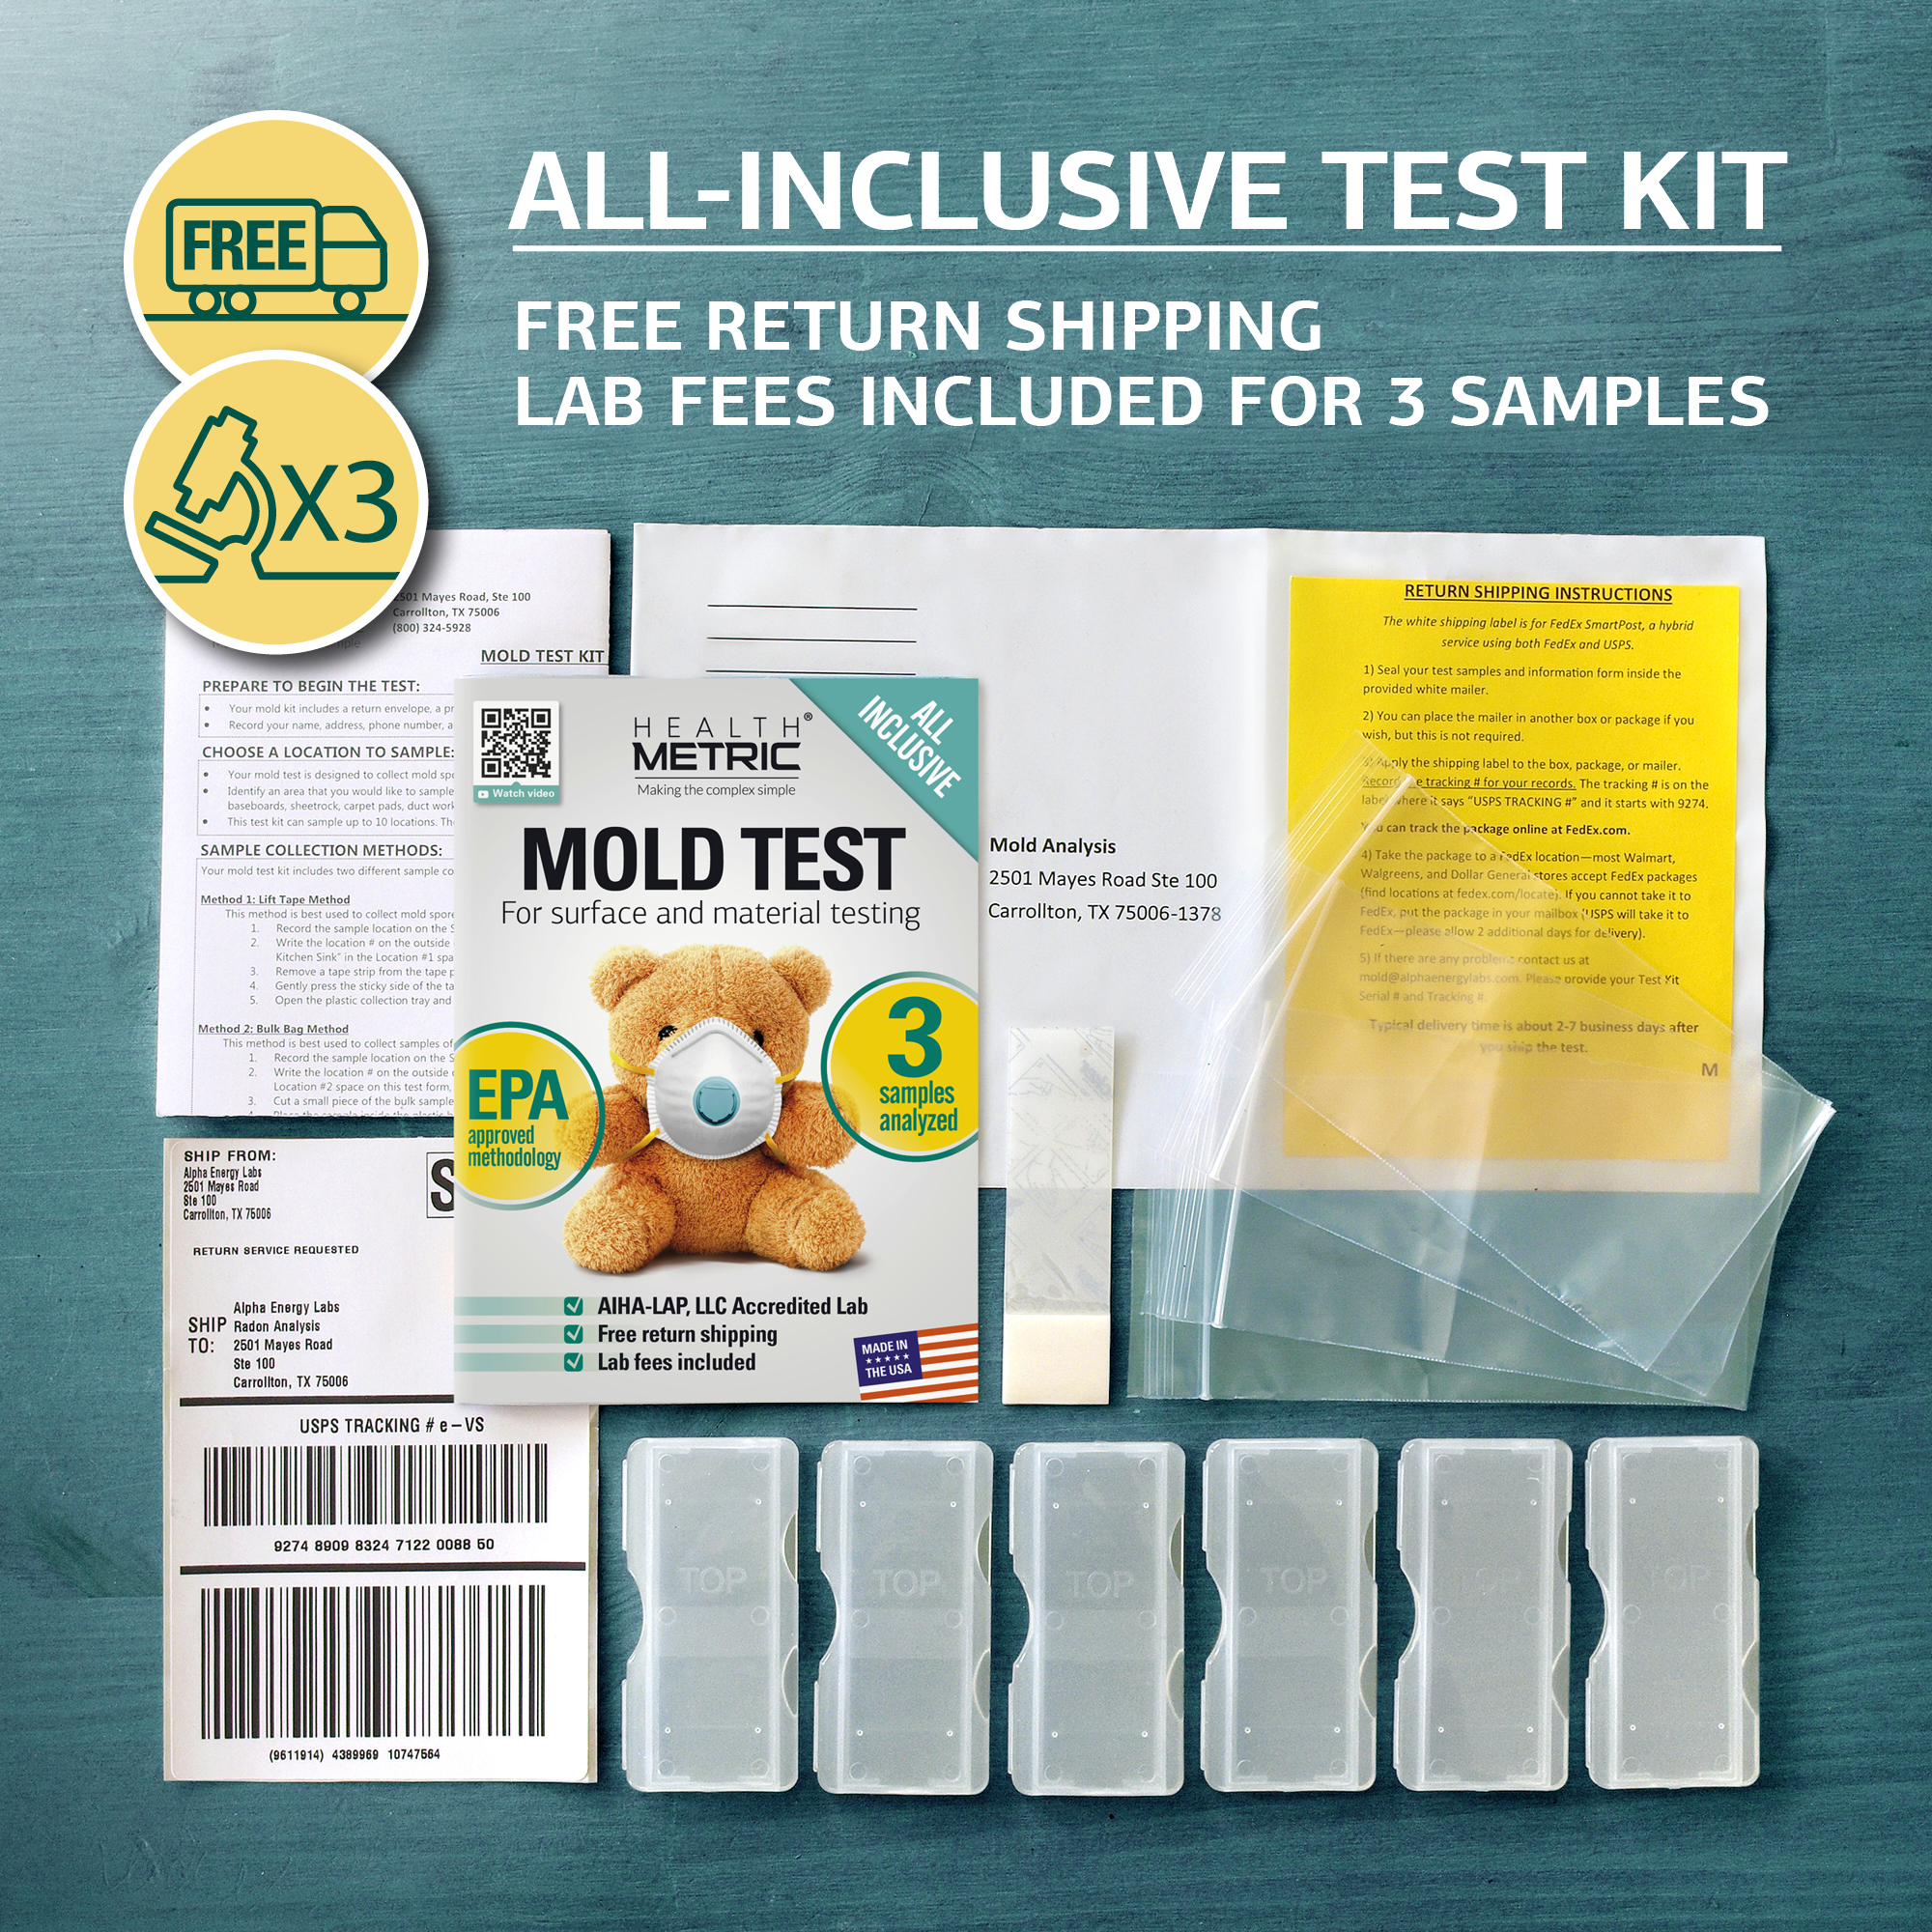 R-CARD® Yeast and Mold - Rapid Test with Accurate Count - 25 Tests